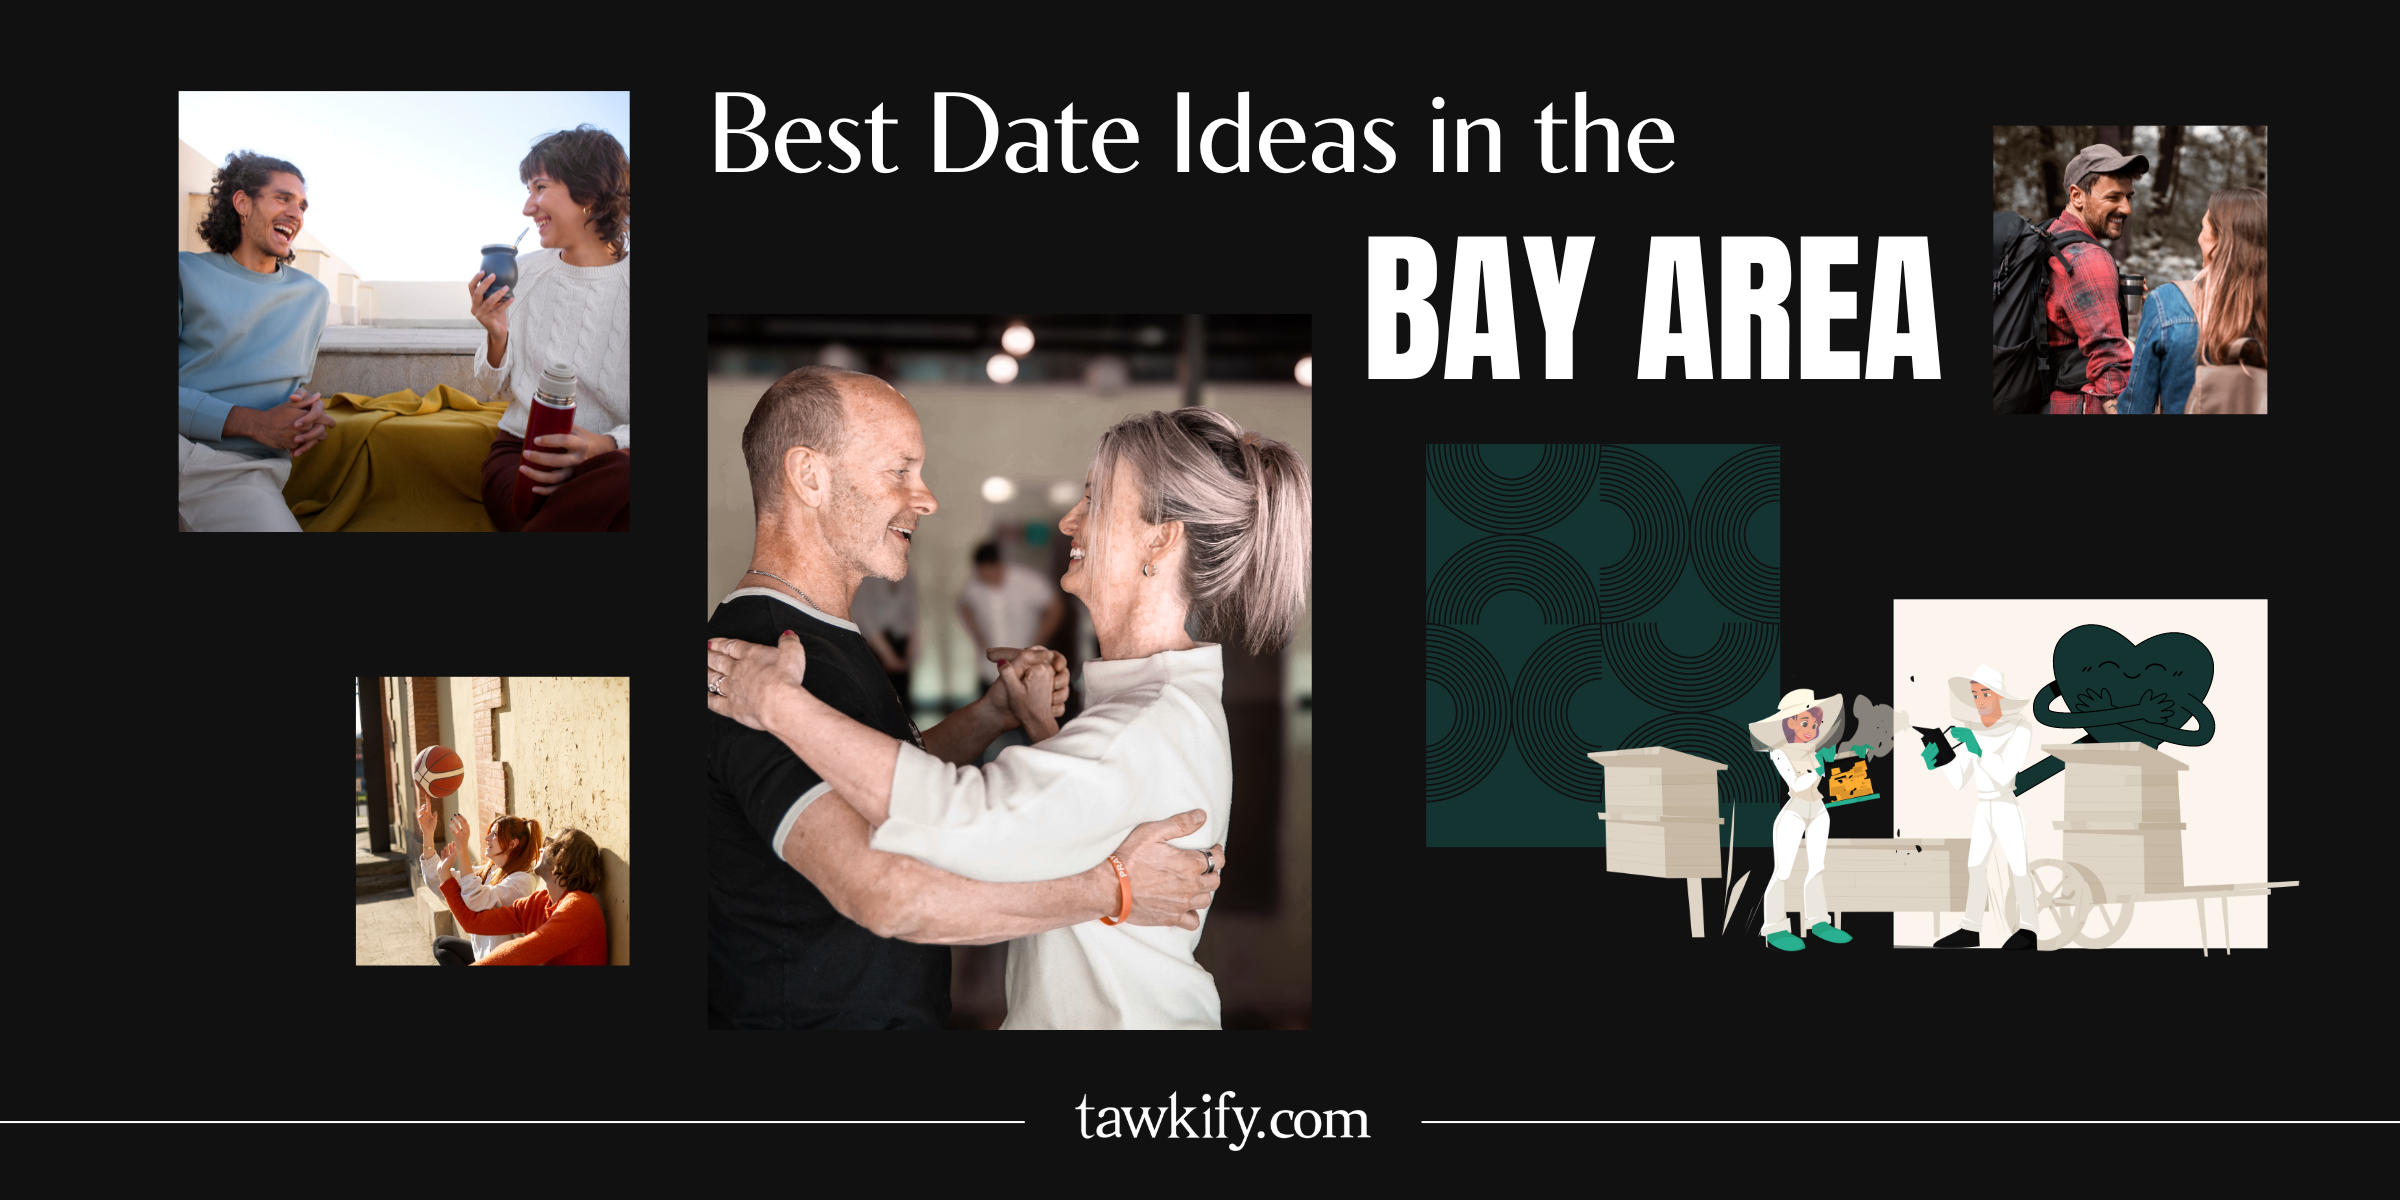 Get inspired by these date ideas in the Bay Area, ranging from outdoor adventures, to wine tastings, to delectable dinners and beyond. There’s something for everyone!